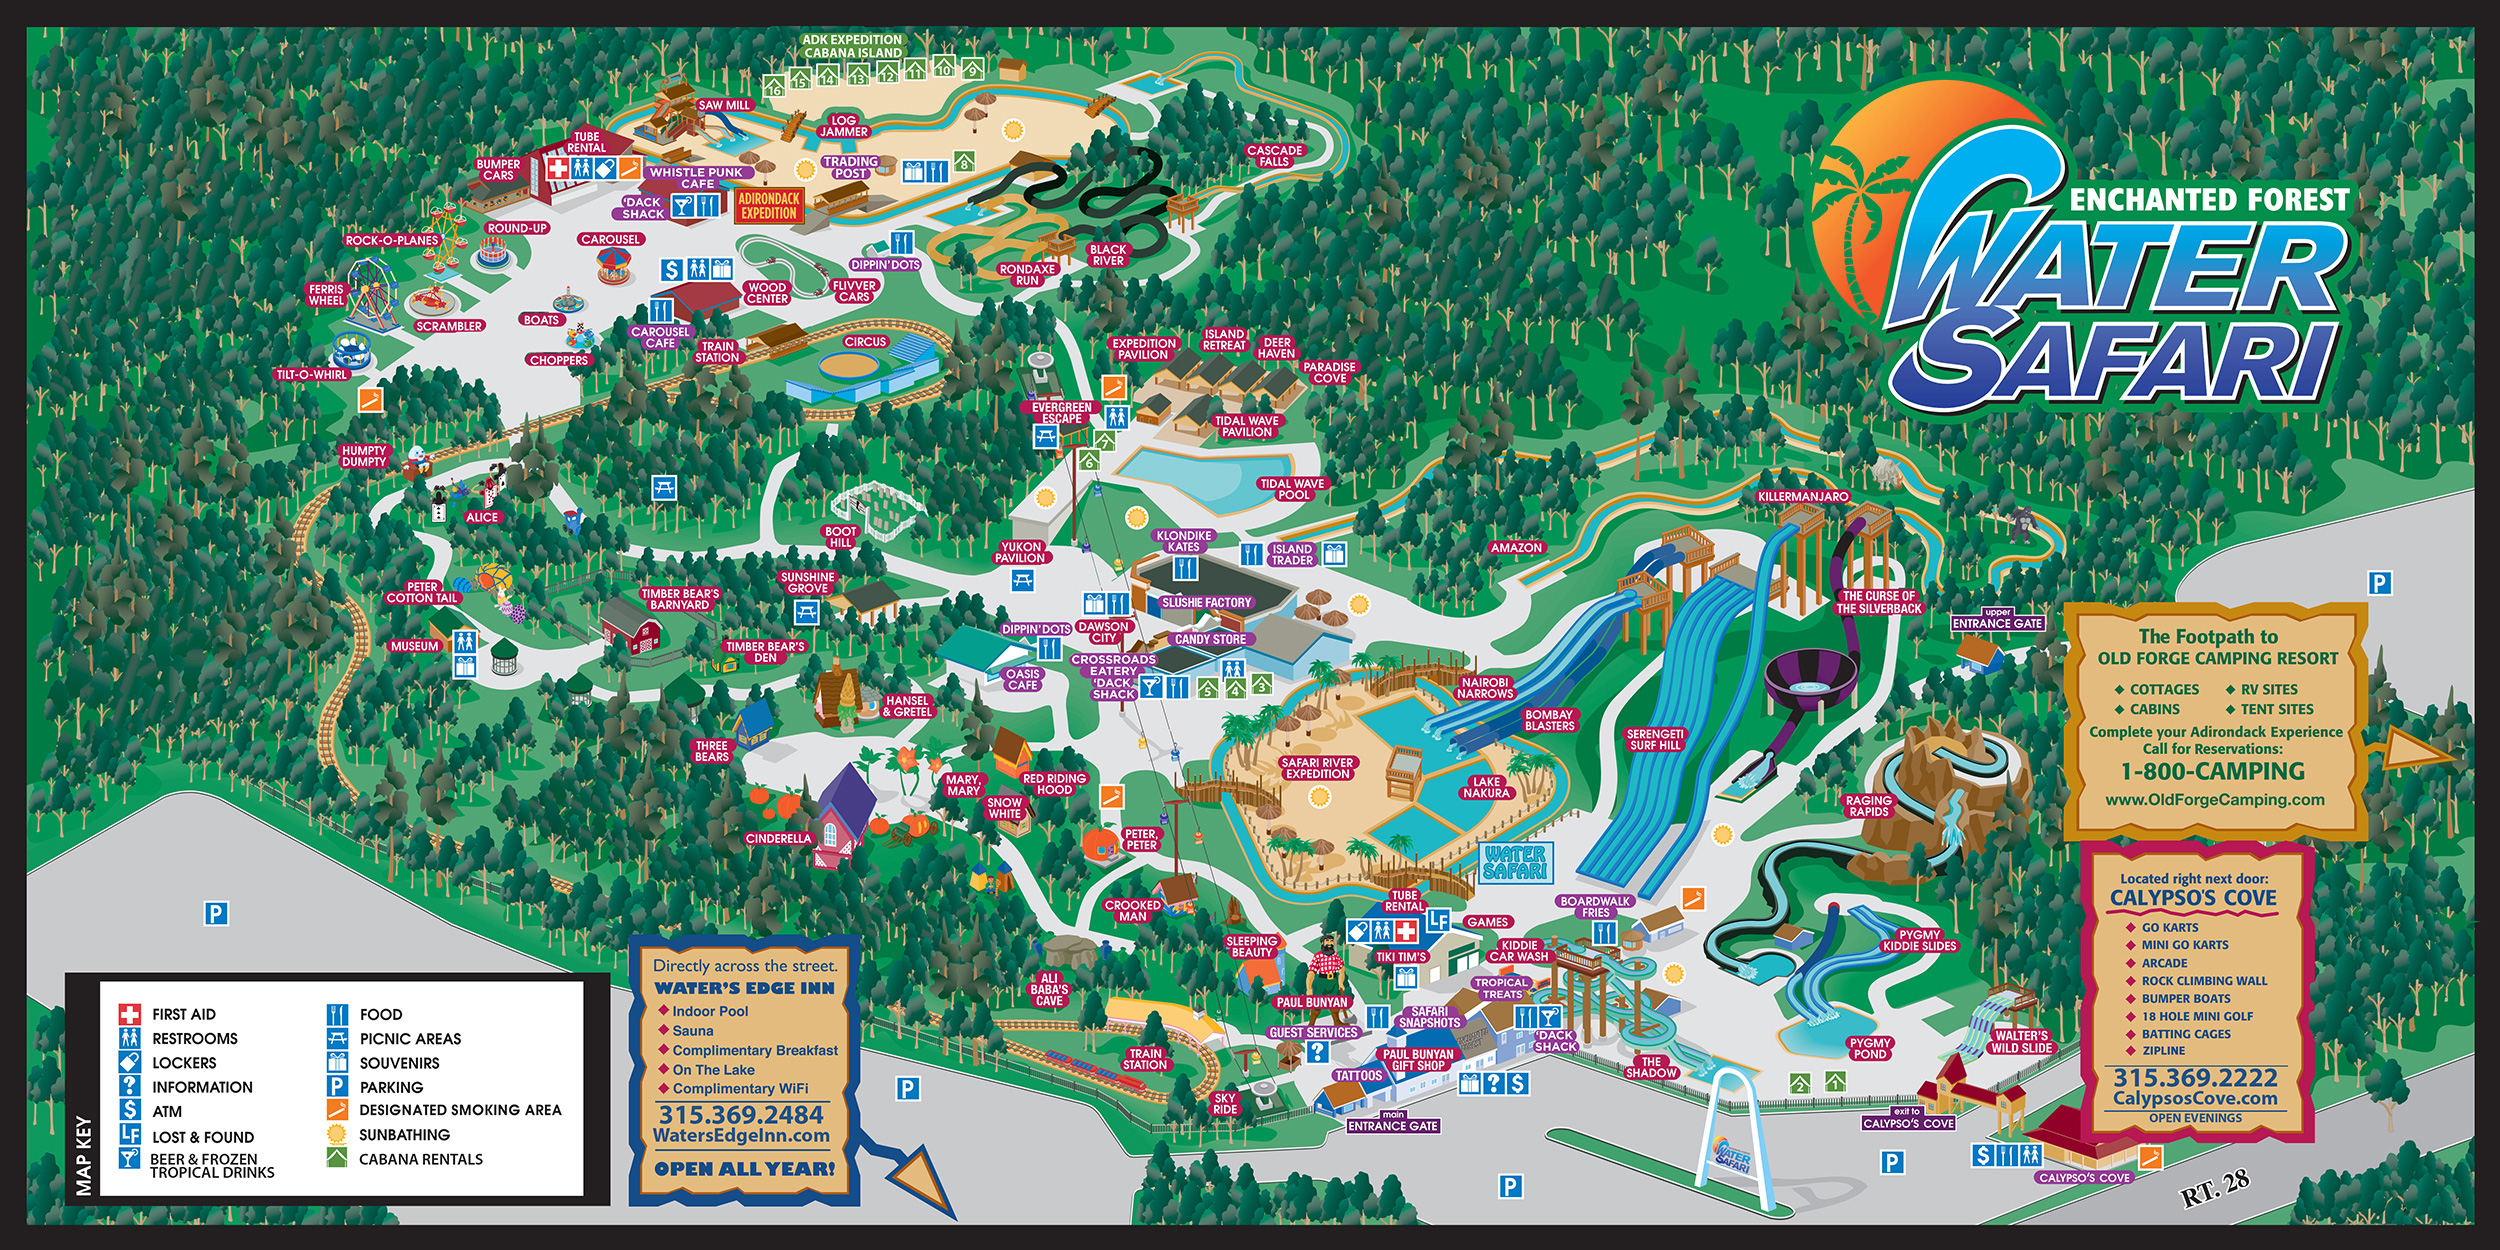 An image of the Enchanted Forest Water Safari map with the Enchanted Forest Water Safari logo in the top right corner. The map of the park is colorful and has depictions of all of the rides and attractions. The park is surrounded by green trees and the grey parking lot. In the bottom left corner in a white box, outlined in black, with the map key, and a tan box, outlined in blue, to the right of it with information about the Water's Edge Inn. In the bottom right corner are two tan boxes, one outlined in mustard yellow with information about the Old Forge Camping Resort, and one outlined in red with information about Calypso's Cove,